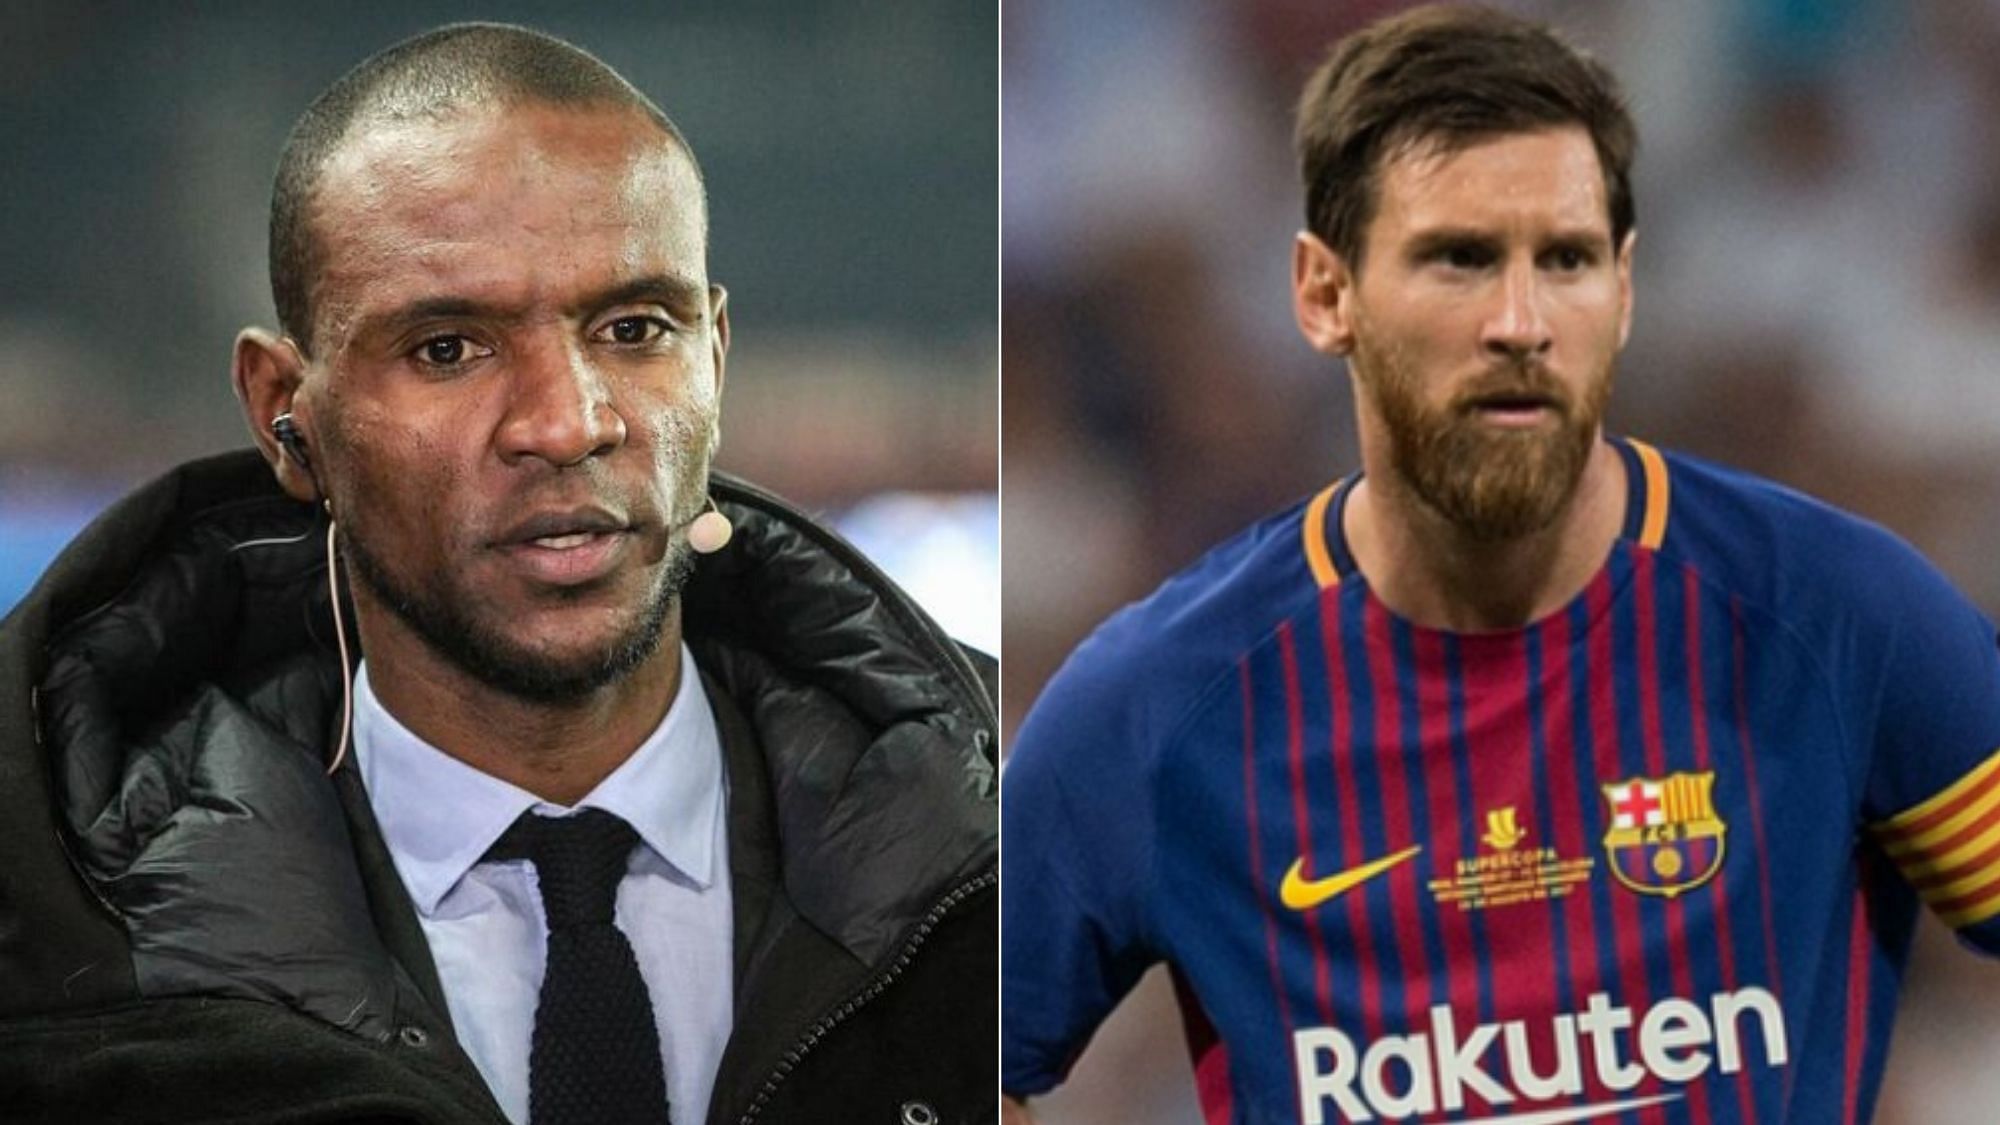 Eric Abidal, who has played with Lionel Messi at Barcelona before, made some comments in an interview with Spanish newspaper Diario Sport.